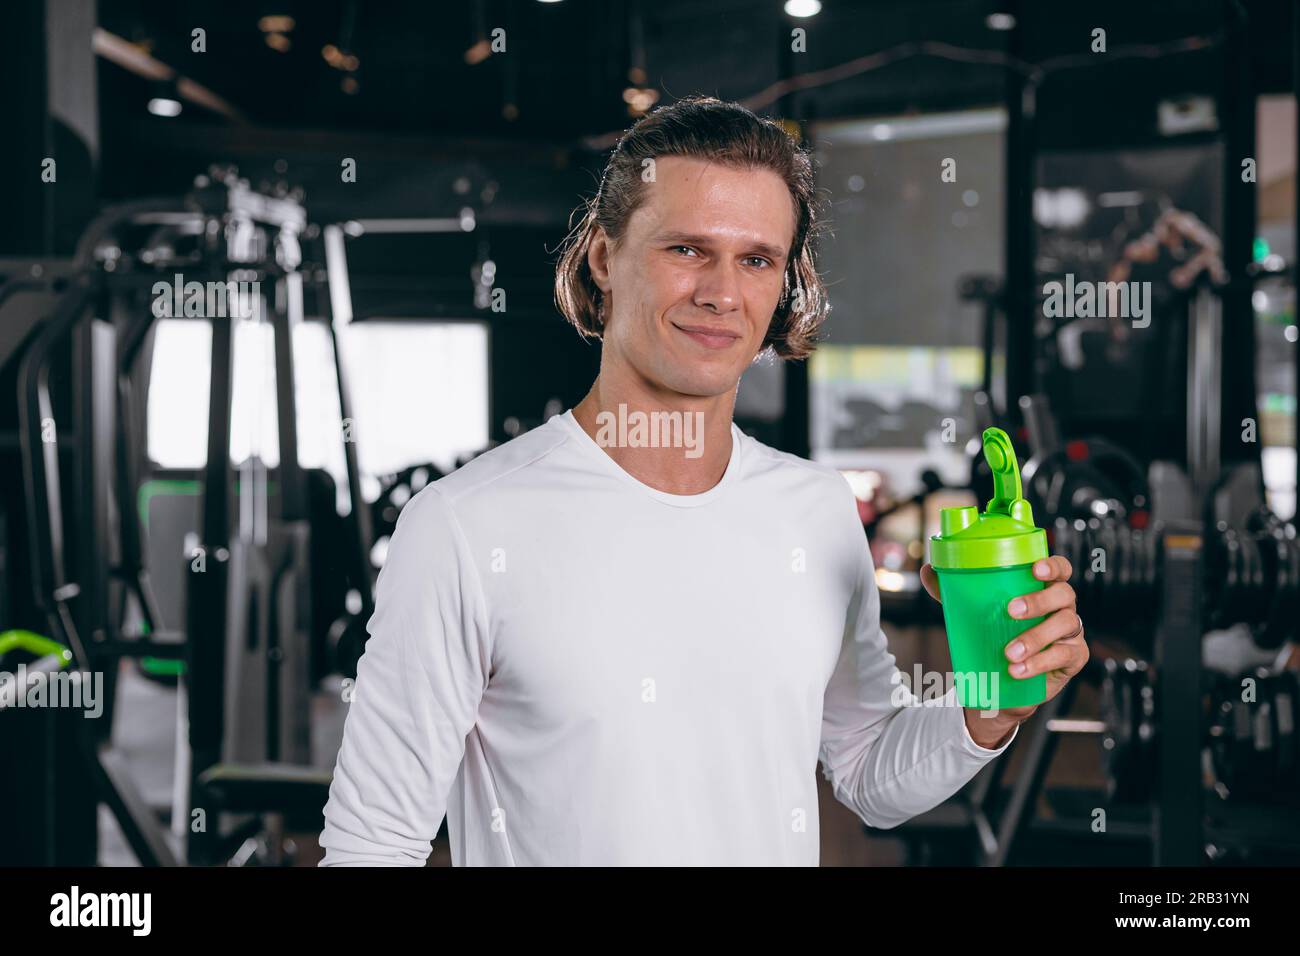 healthy sport man with whey shaker bottle. happy drinking whey protein for muscle strength mass gain and low fat beverage meal in gym fitness Stock Photo